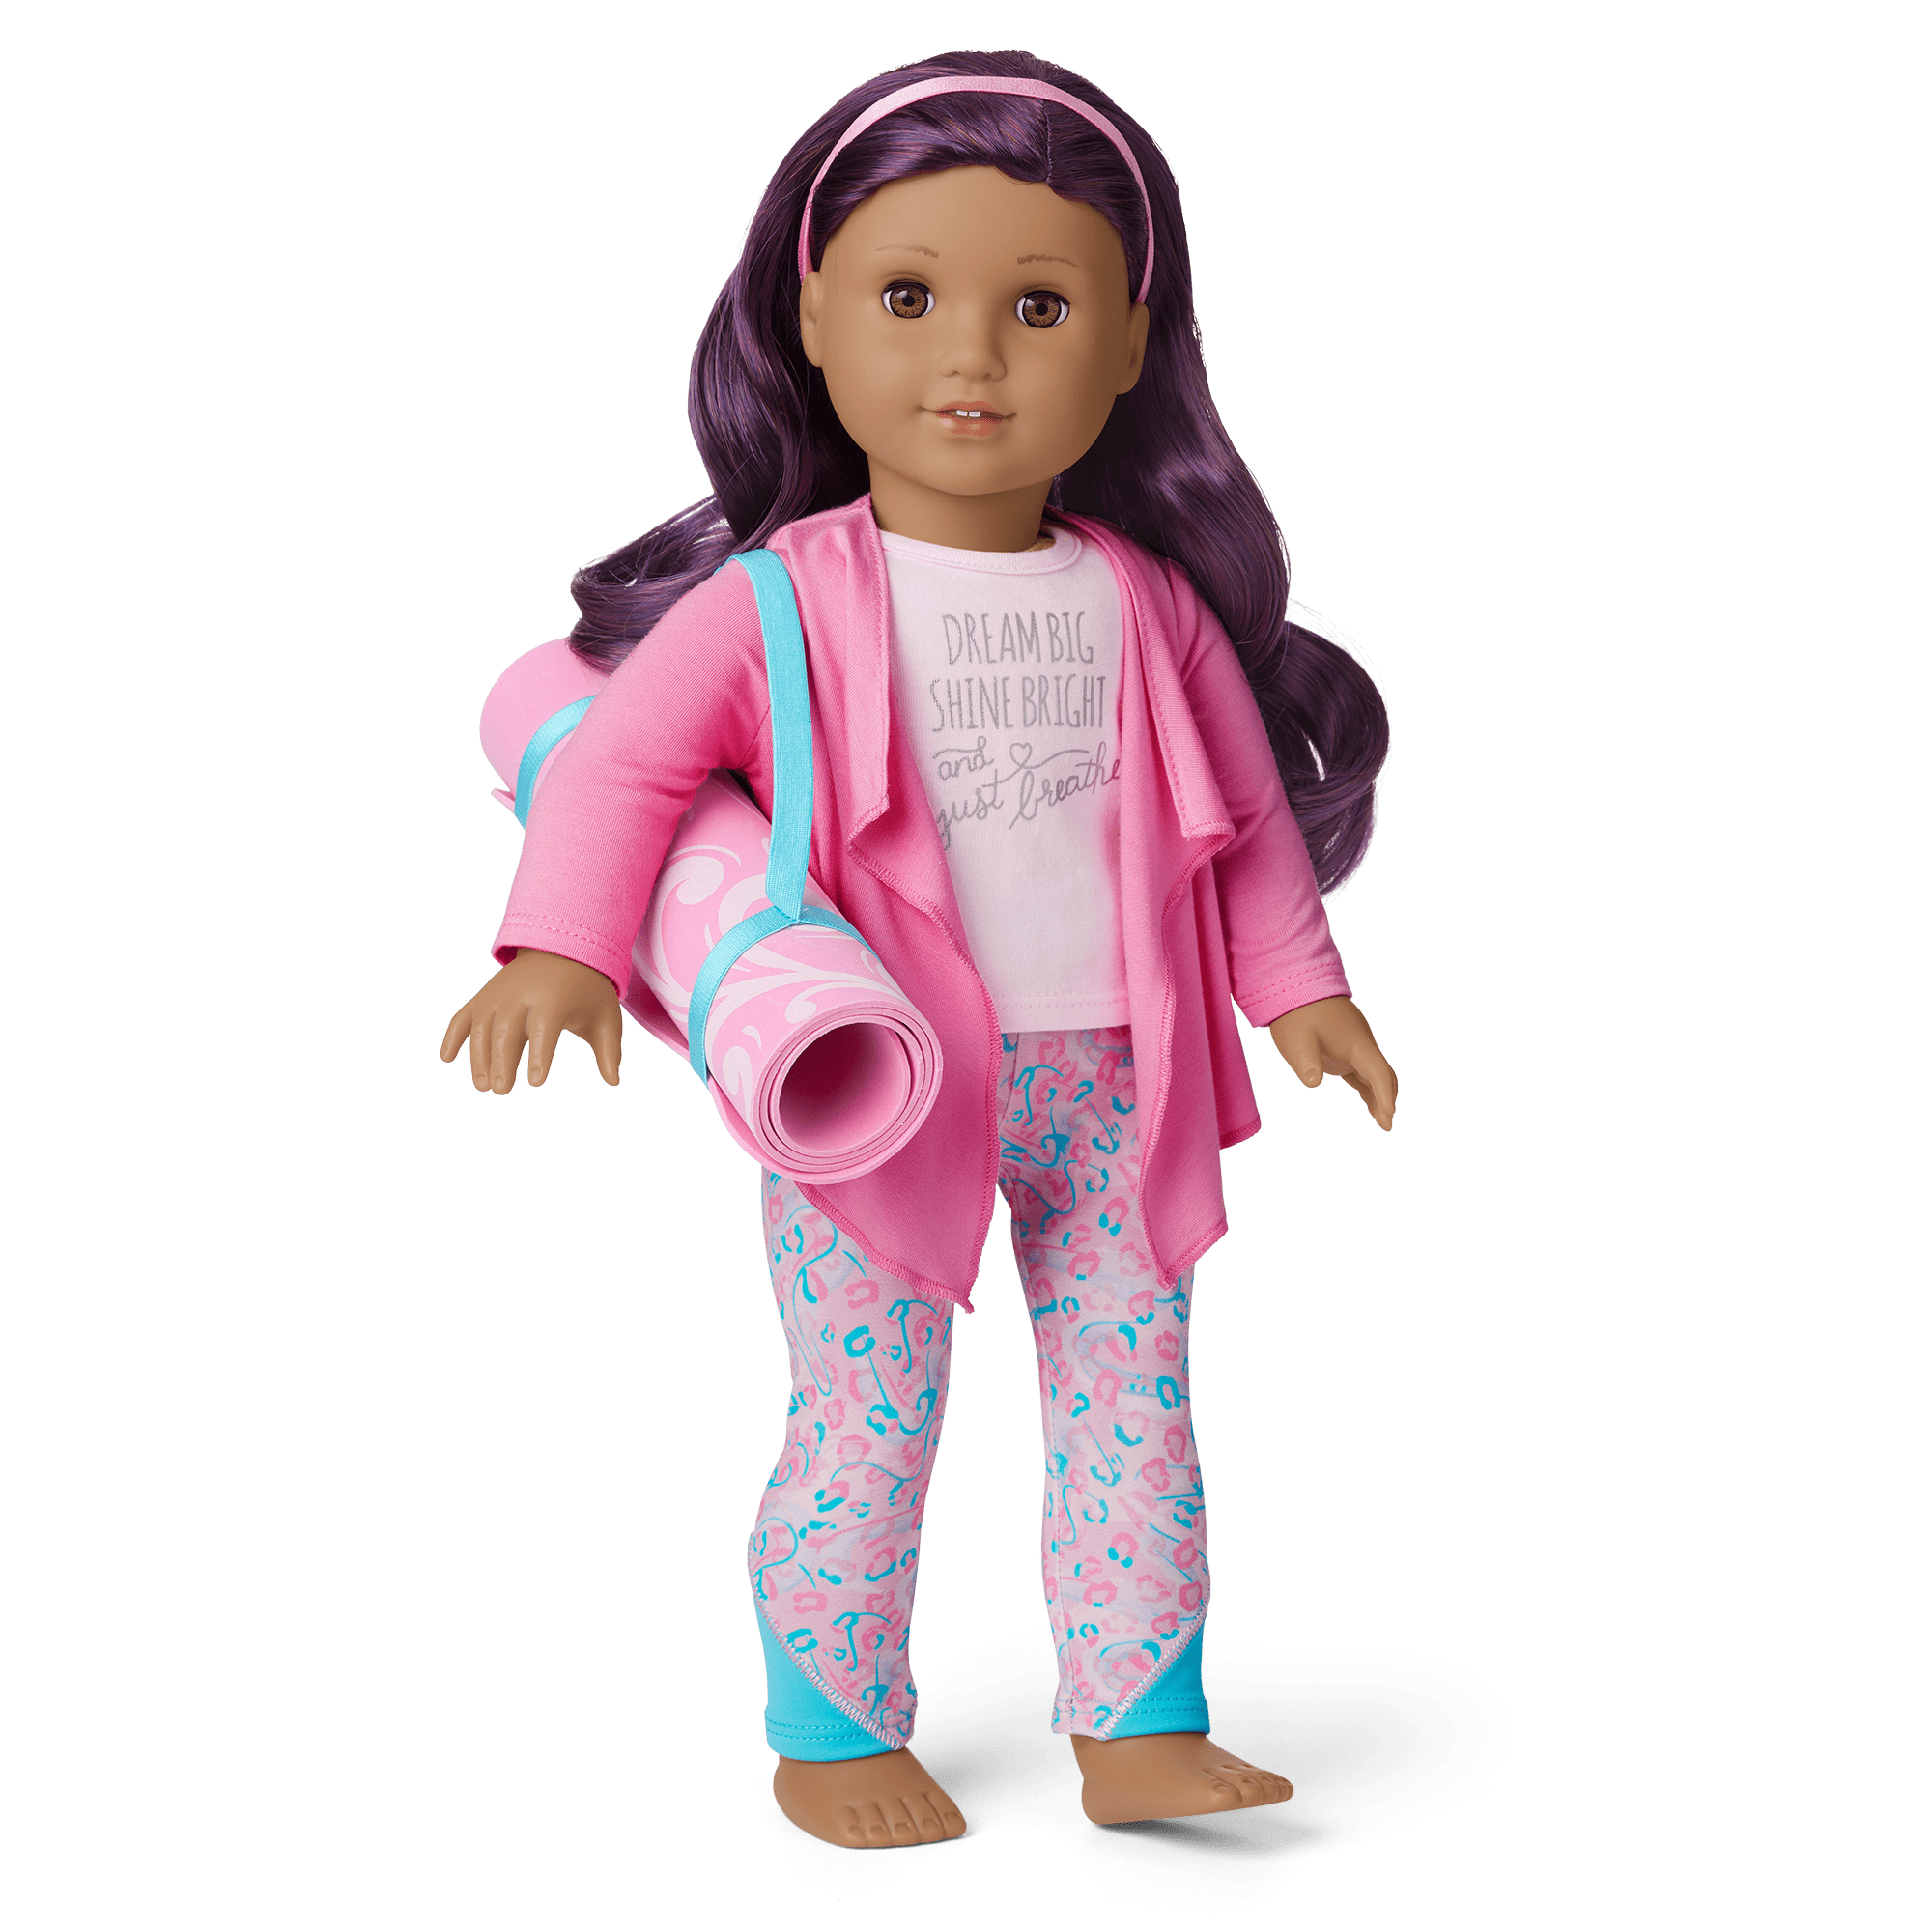 ZITA ELEMENT American 18 Inch Girl Doll Yoga Clothes and Accessories for 18  Inch Dolls Sport Set - 18 Inch Doll Yoga Clothing Outfits with Shoes  Portable Sports Bag Yoga Bands Towel